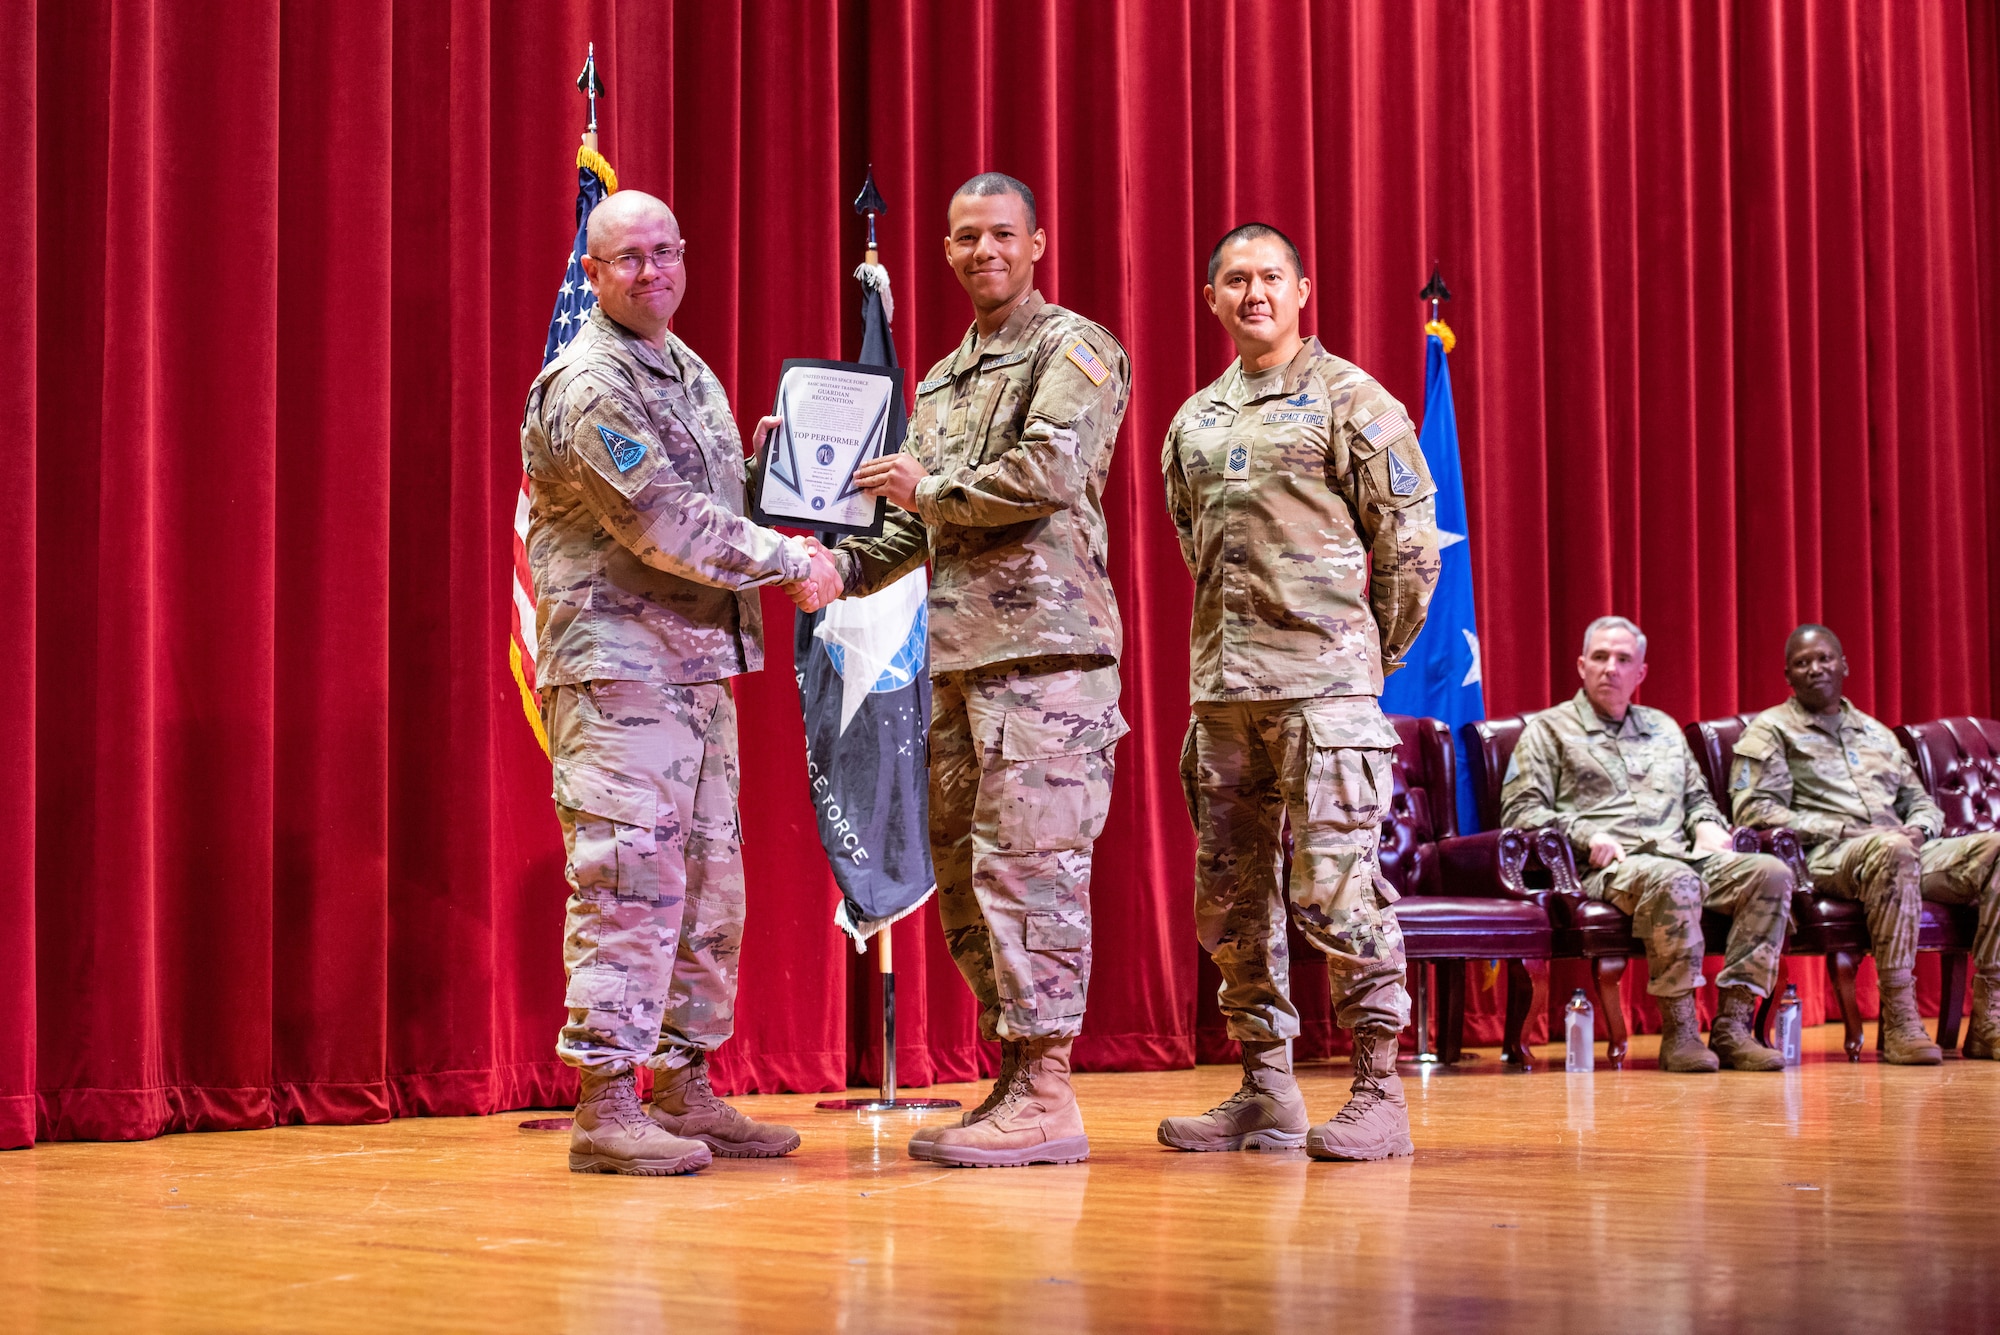 U.S. Space Force Specialist 3 Dakota Desrosiers, all-source intelligence analyst, receives the USSF Basic Military Training (BMT) Top Performer award during a private patching ceremony at Joint Base San Antonio–Lackland, Texas, on June 20, 2023. Desrosiers is the first USSF-trained Guardian to receive both the USSF Top Performer Award and Top BMT Graduate award.